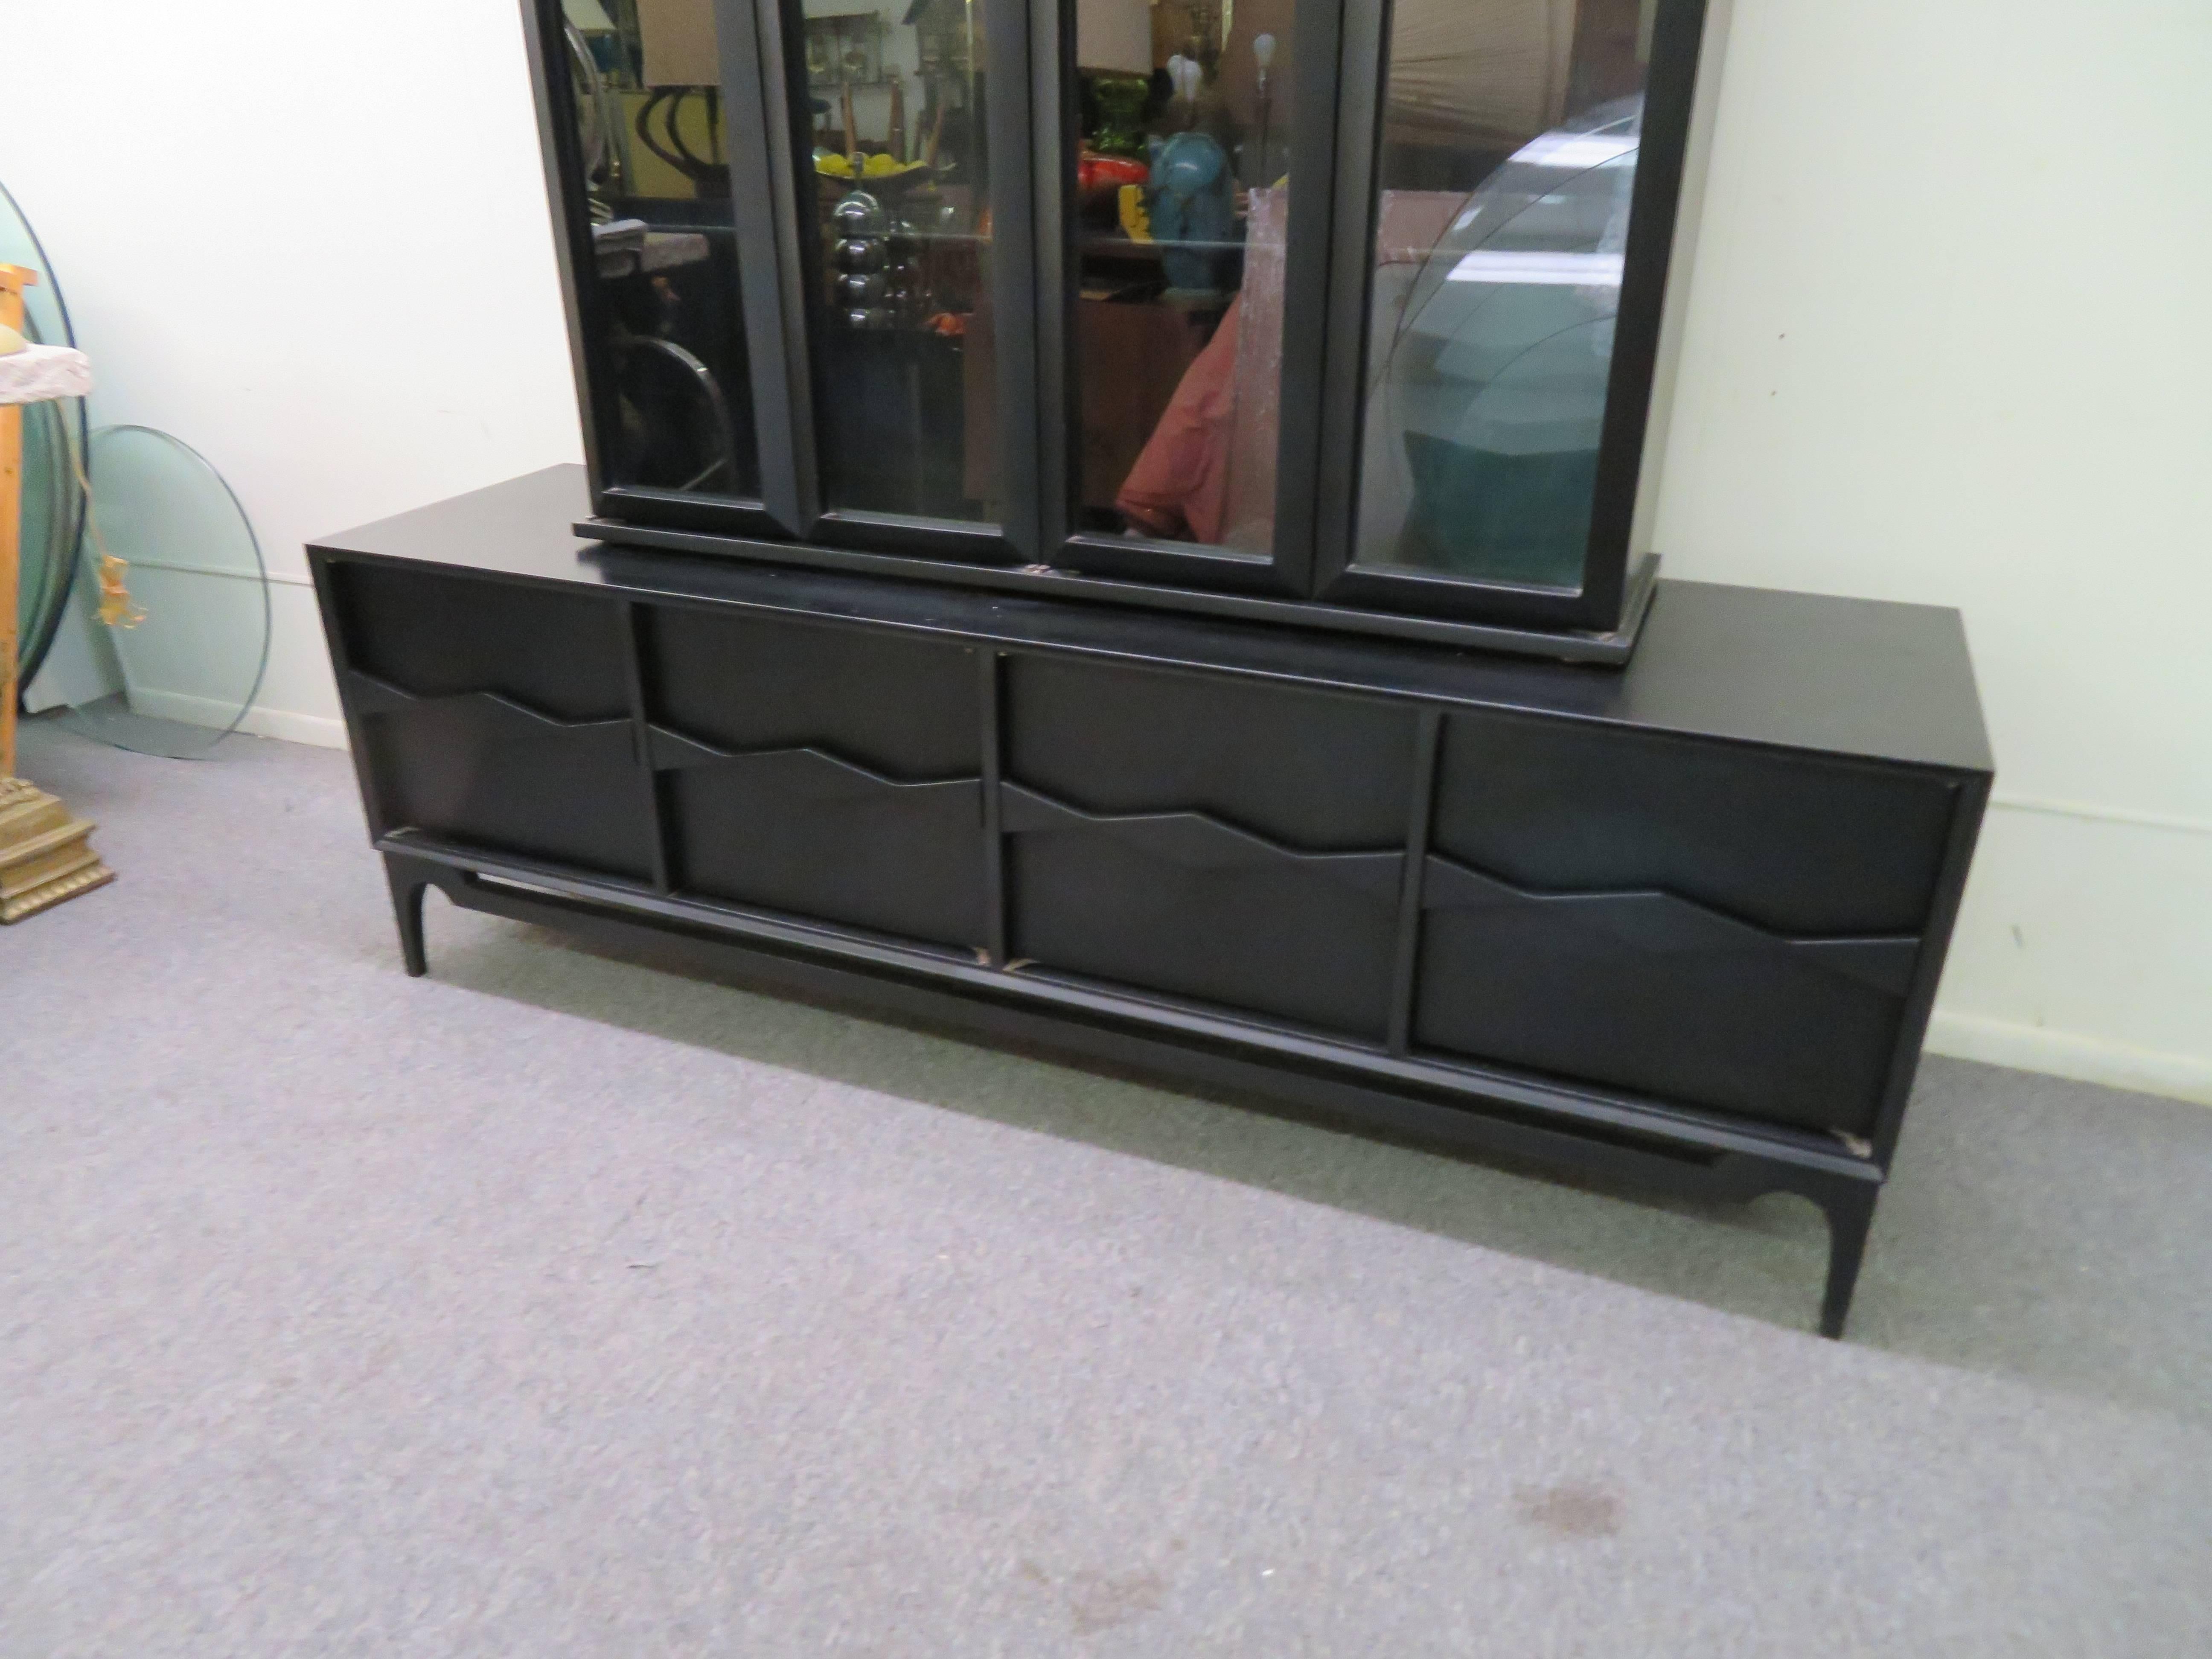 Spectacular Asian modern black lacquered two-piece hutch credenza. This is one of those pieces that makes a huge impact-we love the zig-zag top detail. We know that hutches are kind of out of fashion but this one is very special and would be